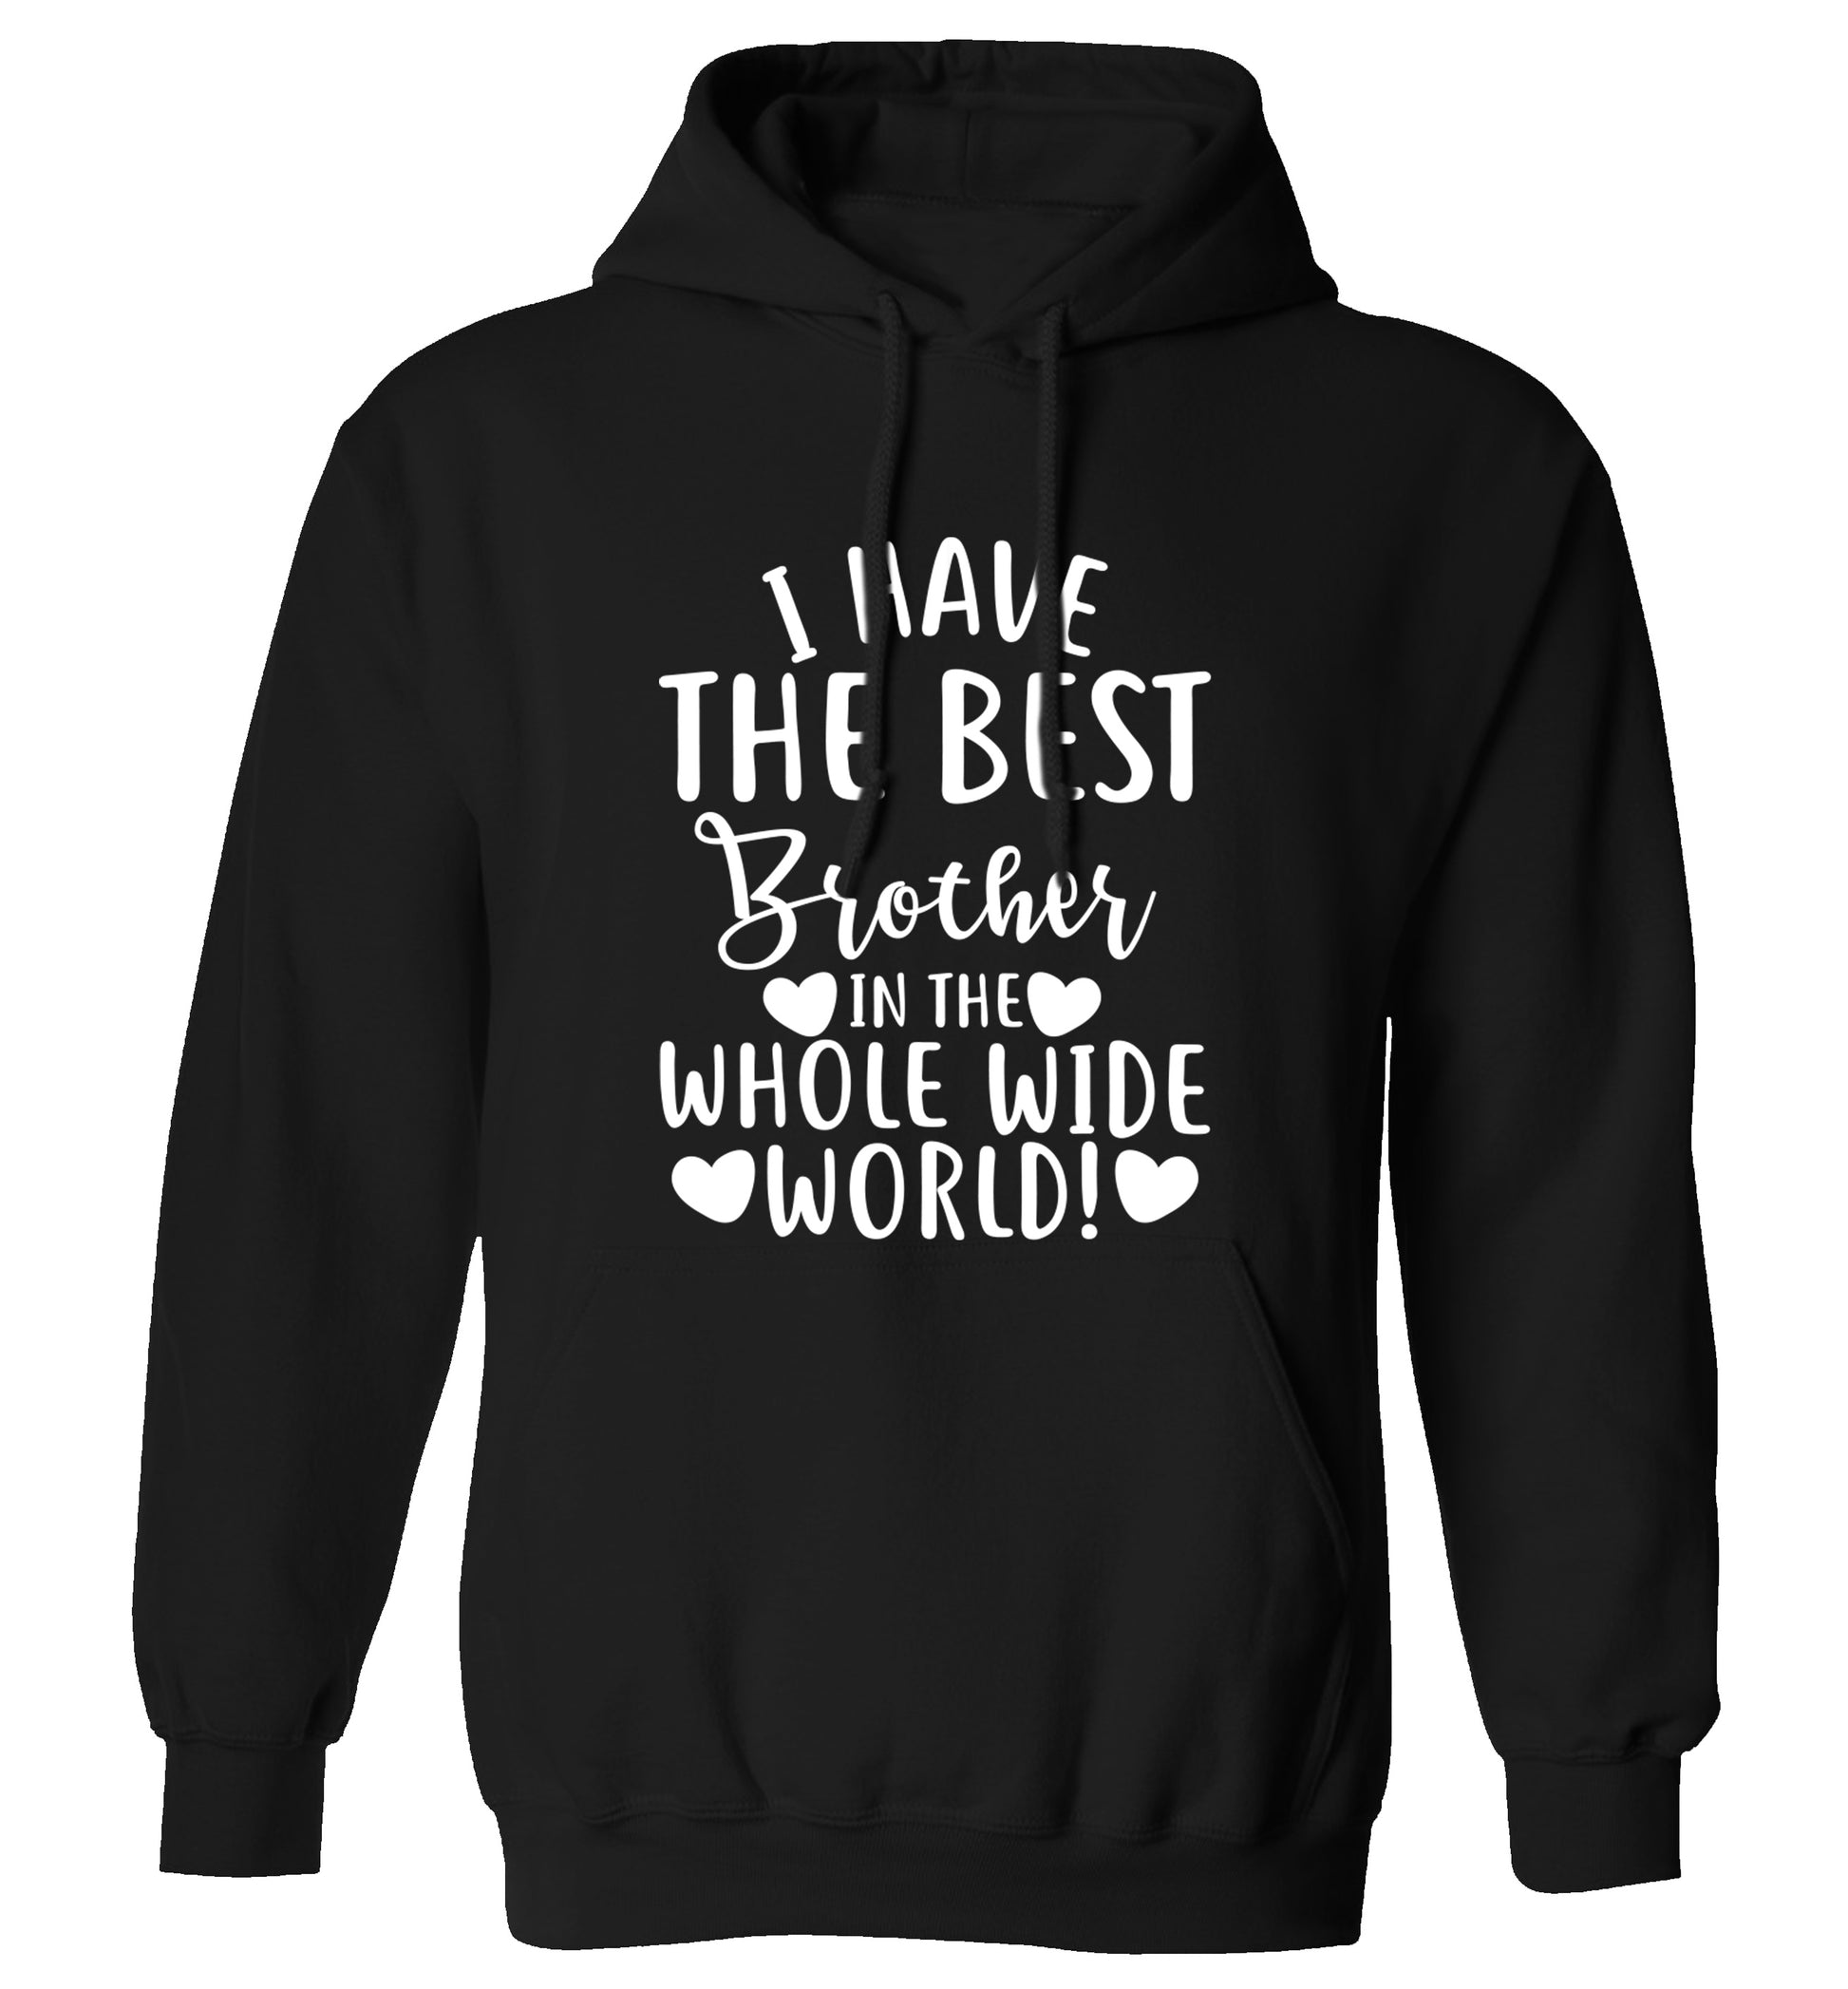 I have the best brother in the whole wide world! adults unisex black hoodie 2XL